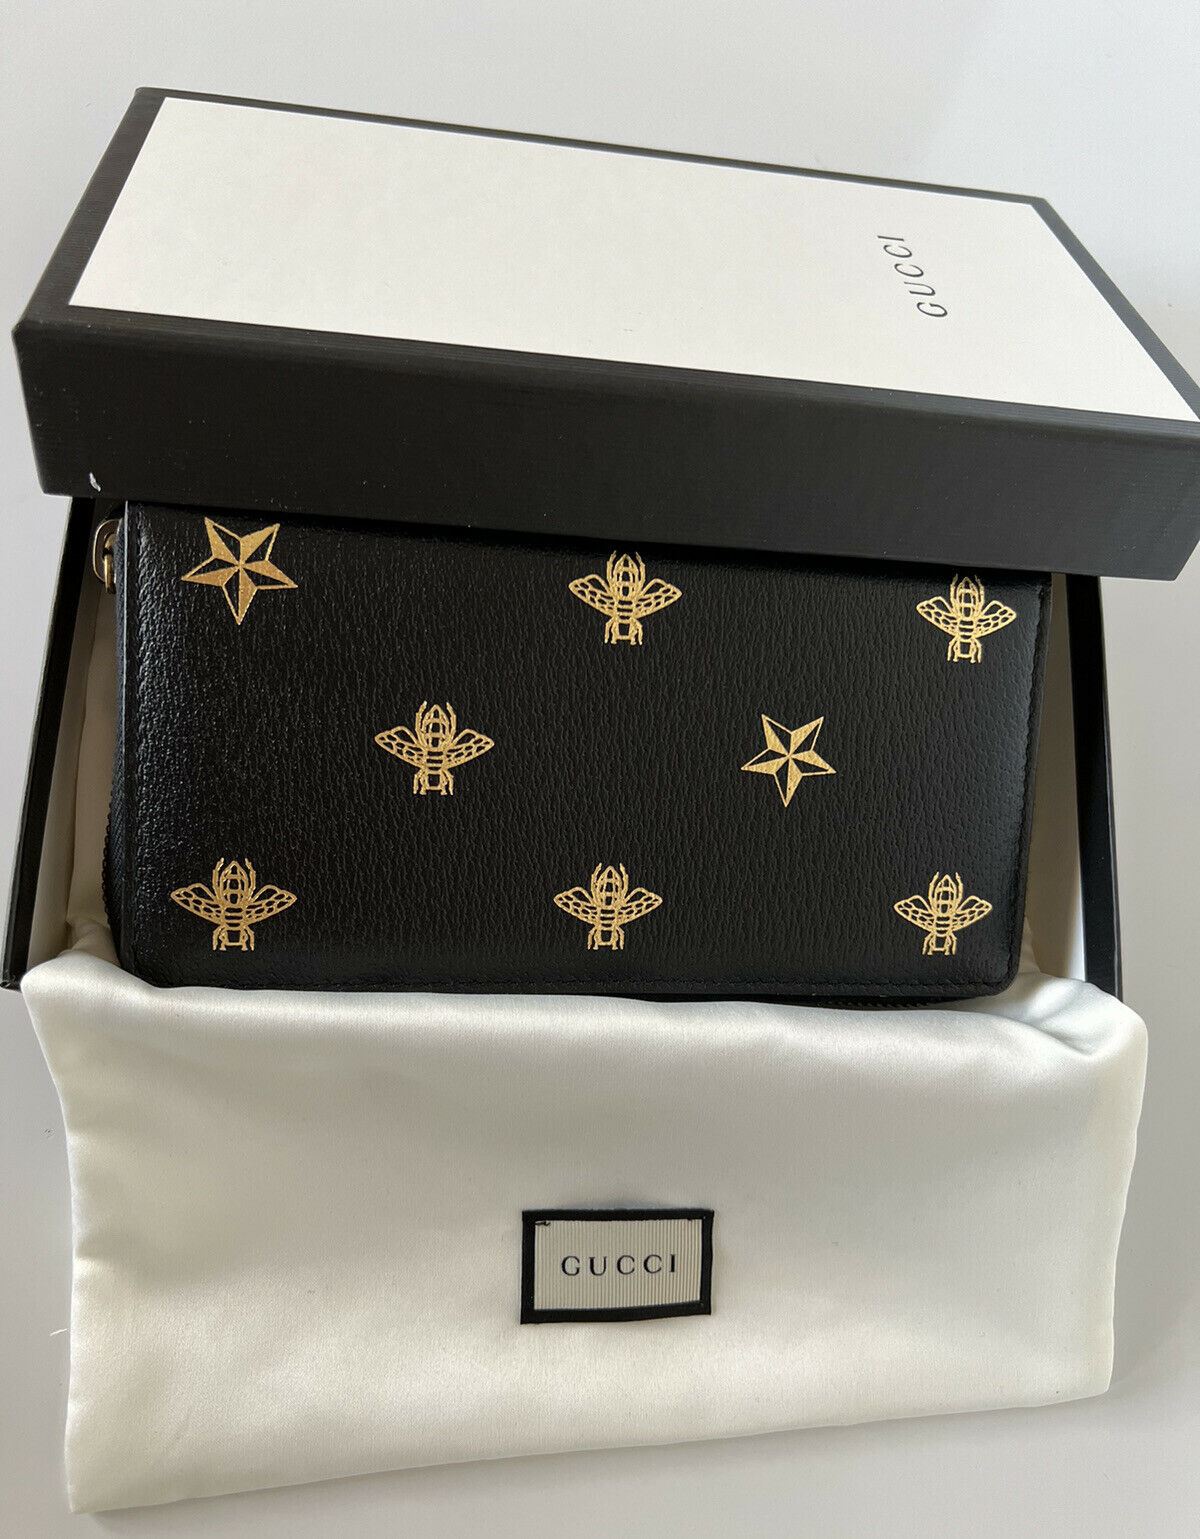 Gucci Black Bee Star Wallet for Men